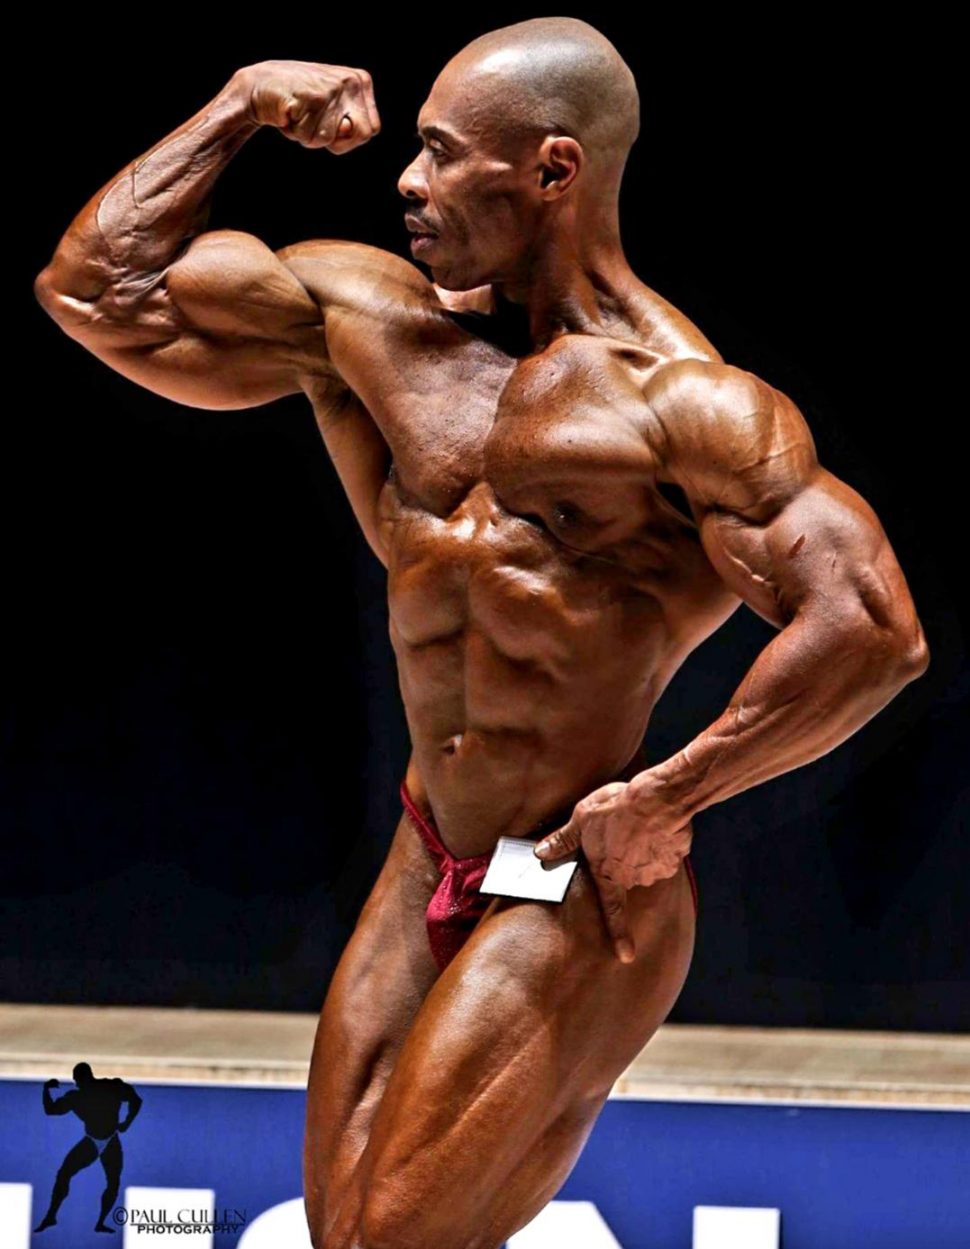 Hugh Ross will be going for gold today at the 2019 NABBA World Championships which will be staged this evening in Belfast, Northern Ireland at the Ulster Hall.
